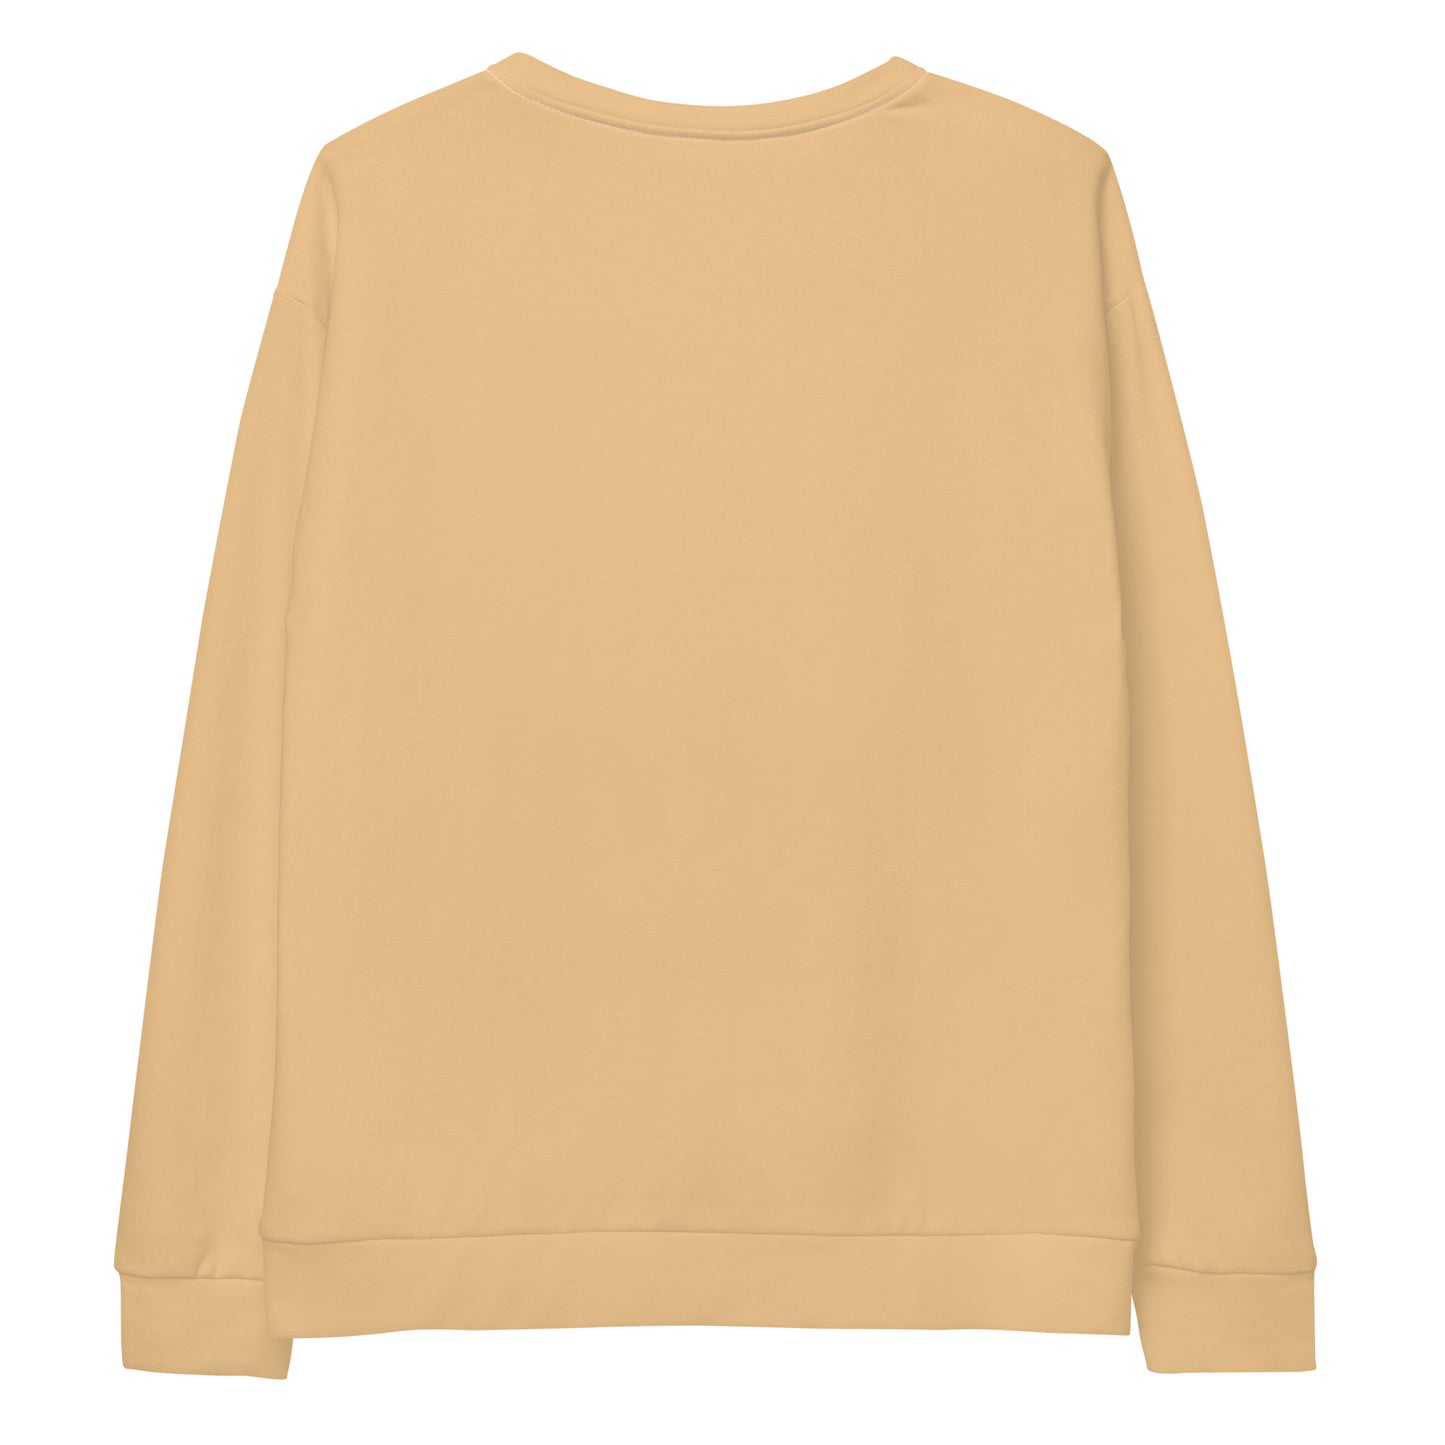 Vertical Lines Peach - Sustainably Made Sweatshirt